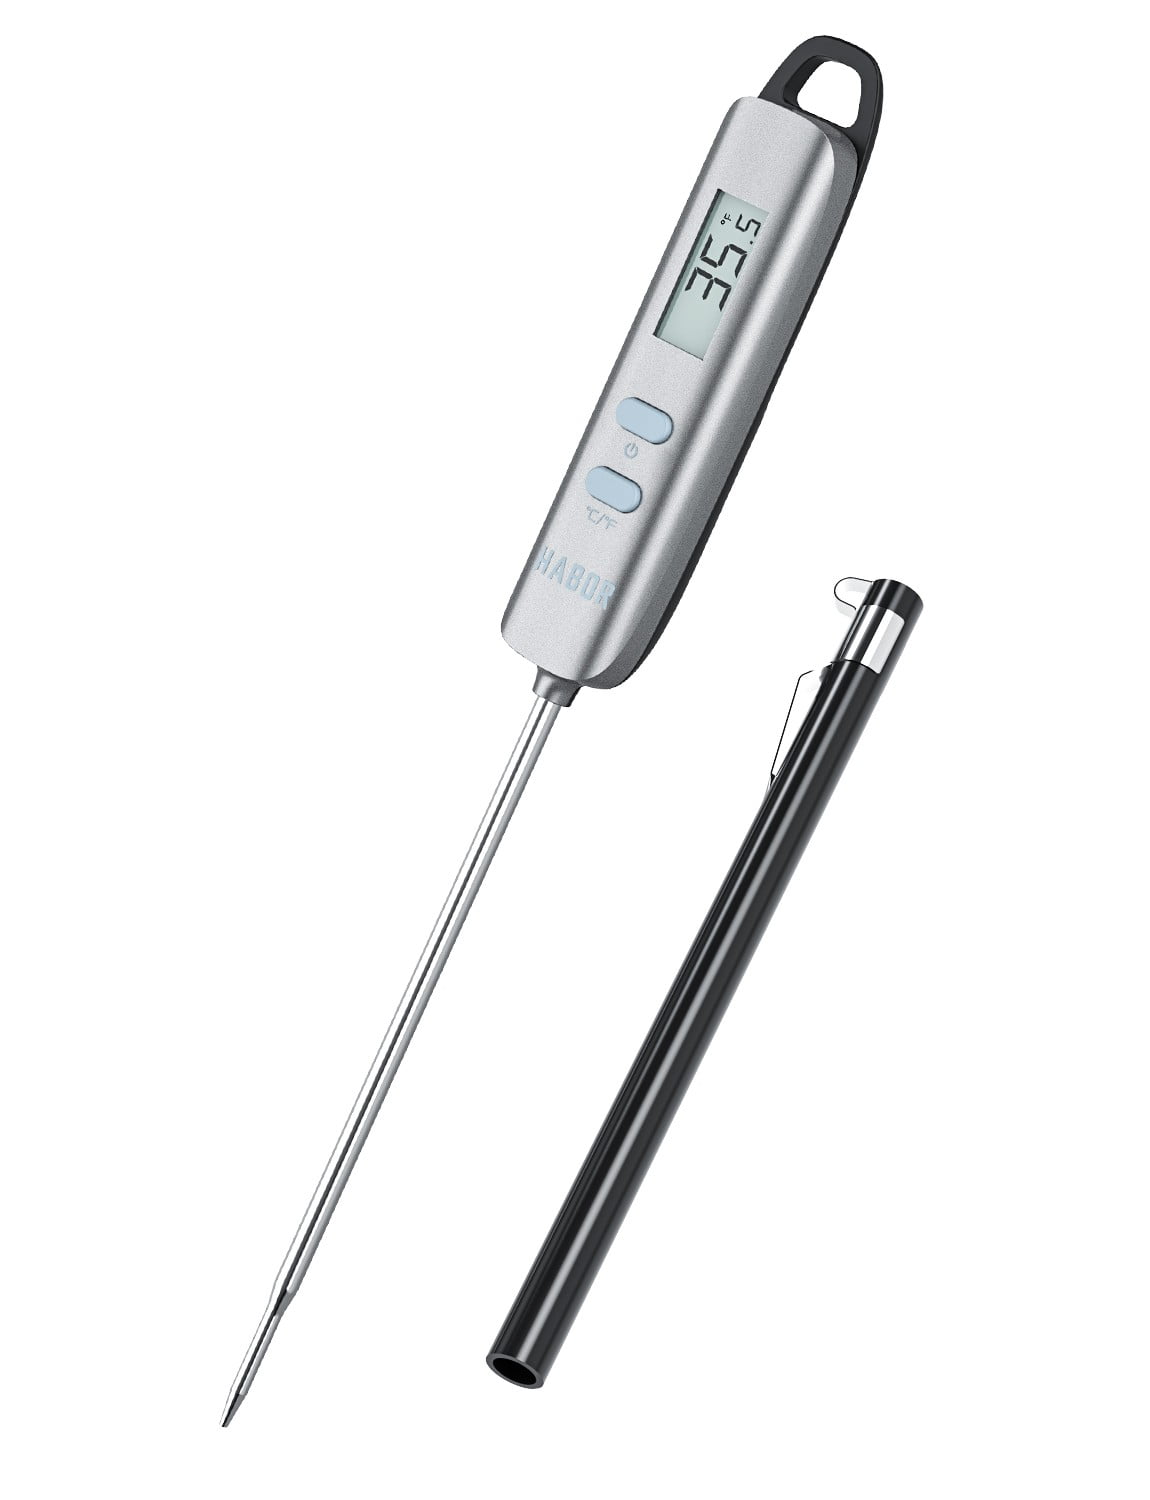 Habor Upgraded Meat Thermometer, Long Probe Digital Cooking 5.5